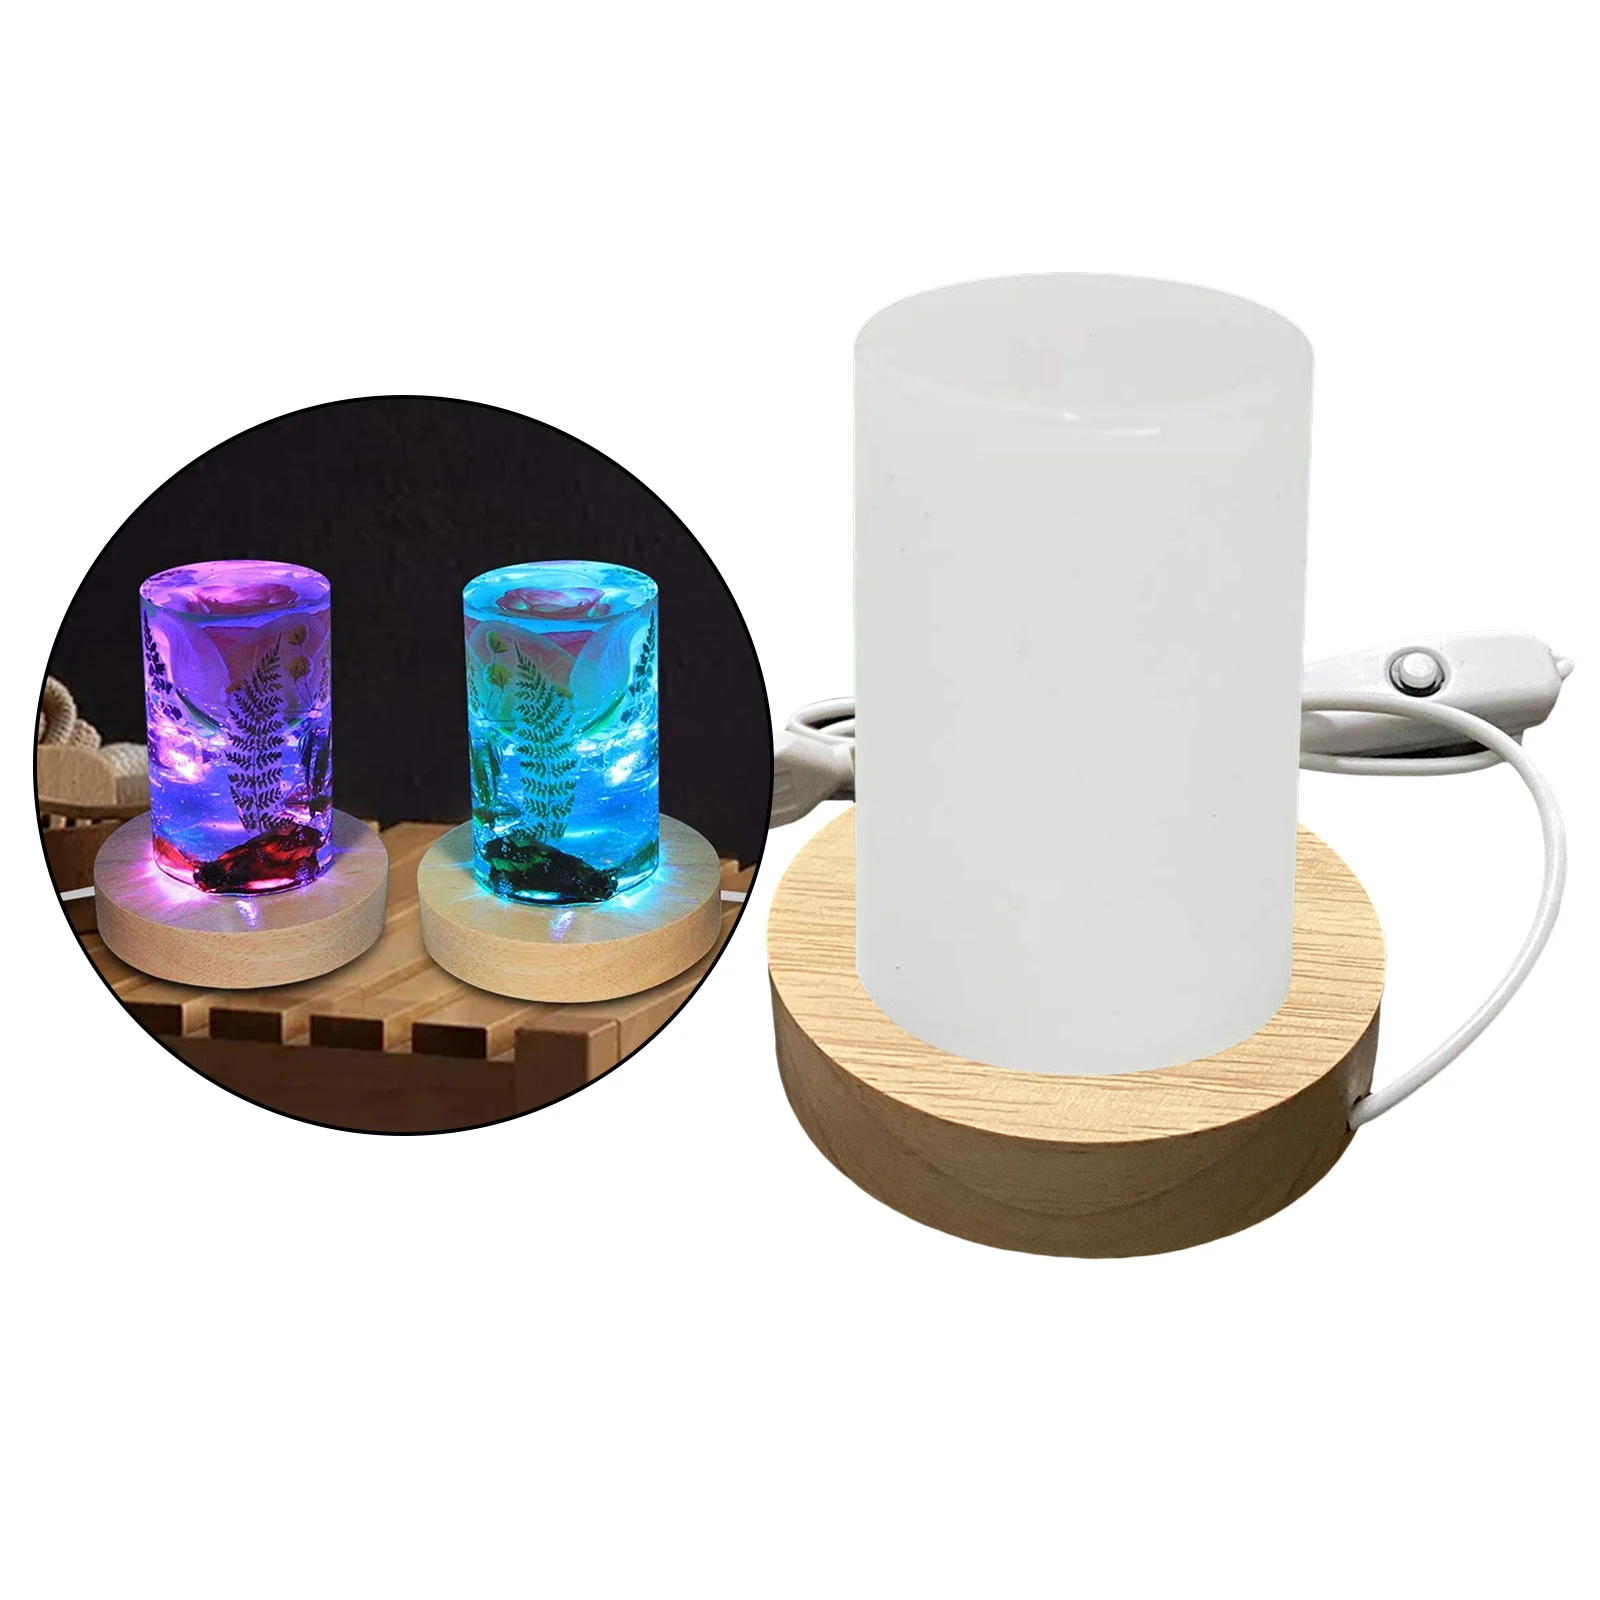 Night Light Silicone Resin Mold - Lamp Resin Mold and USB Powered Wood LED Display Base Stand to DIY Bedside Lamp Candle Making